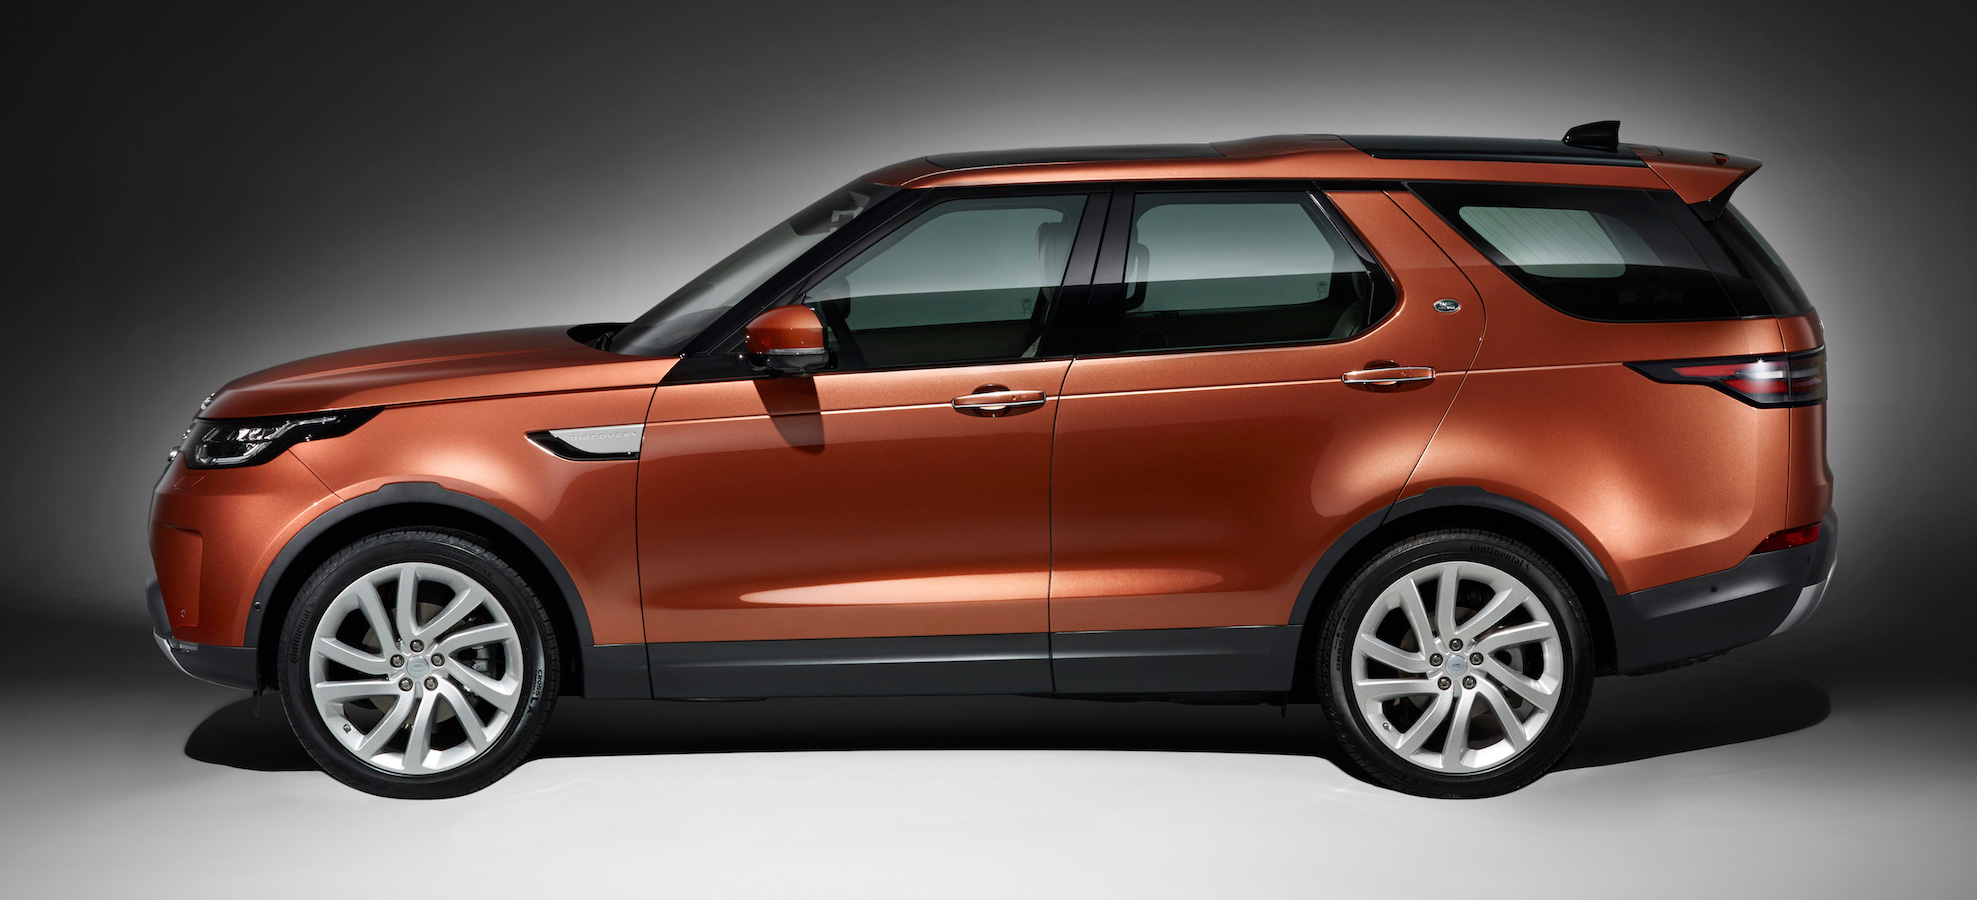 New Land Rover Discovery: full 7-seater, 480 kg lighter 2017-land-rover